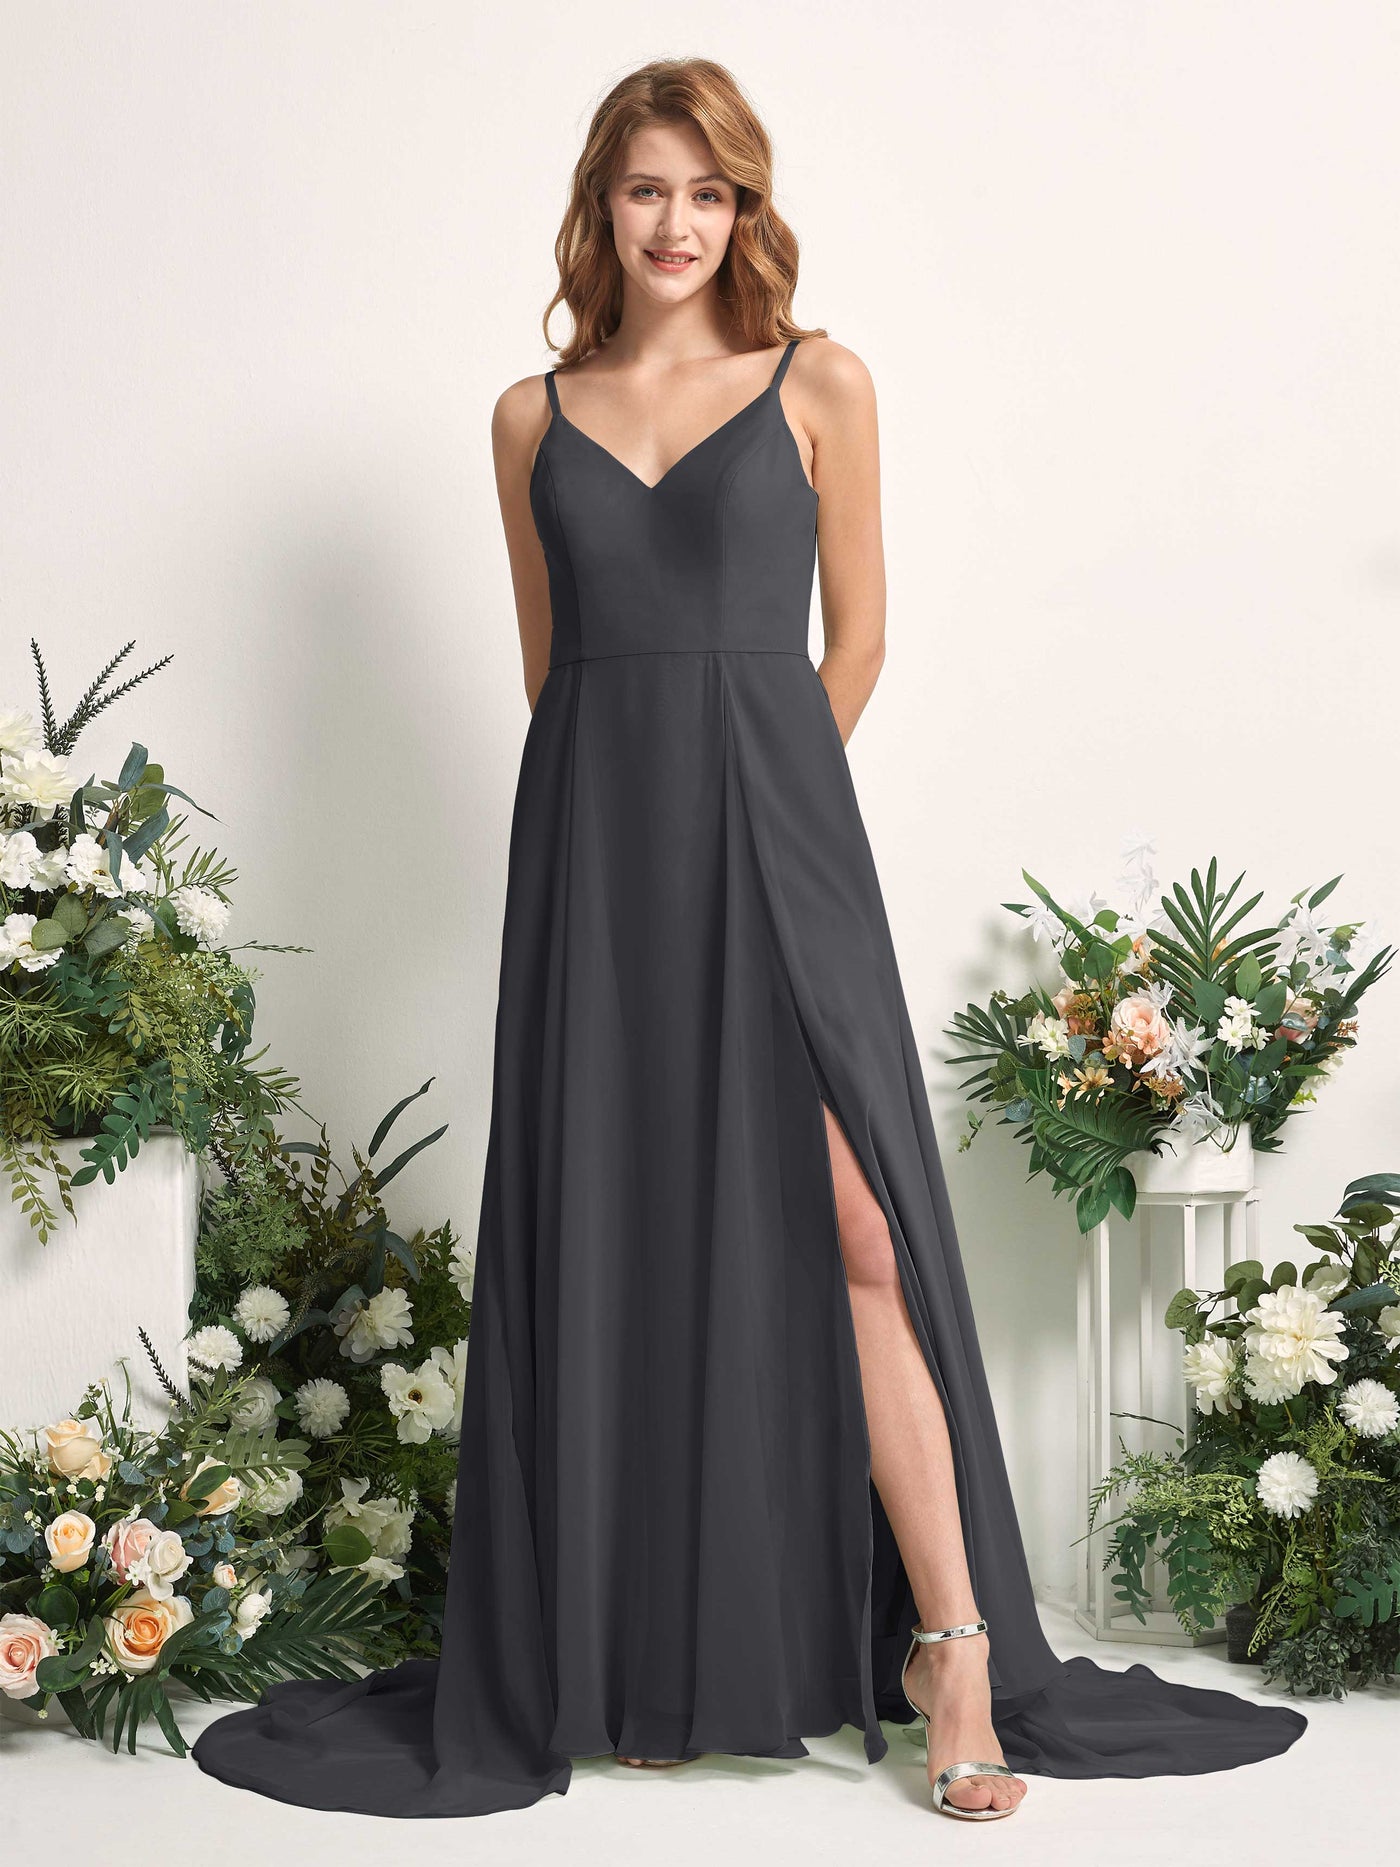 Bridesmaid Dress A-line Chiffon Spaghetti-straps Full Length Sleeveless Wedding Party Dress - Pewter (81227738)#color_pewter